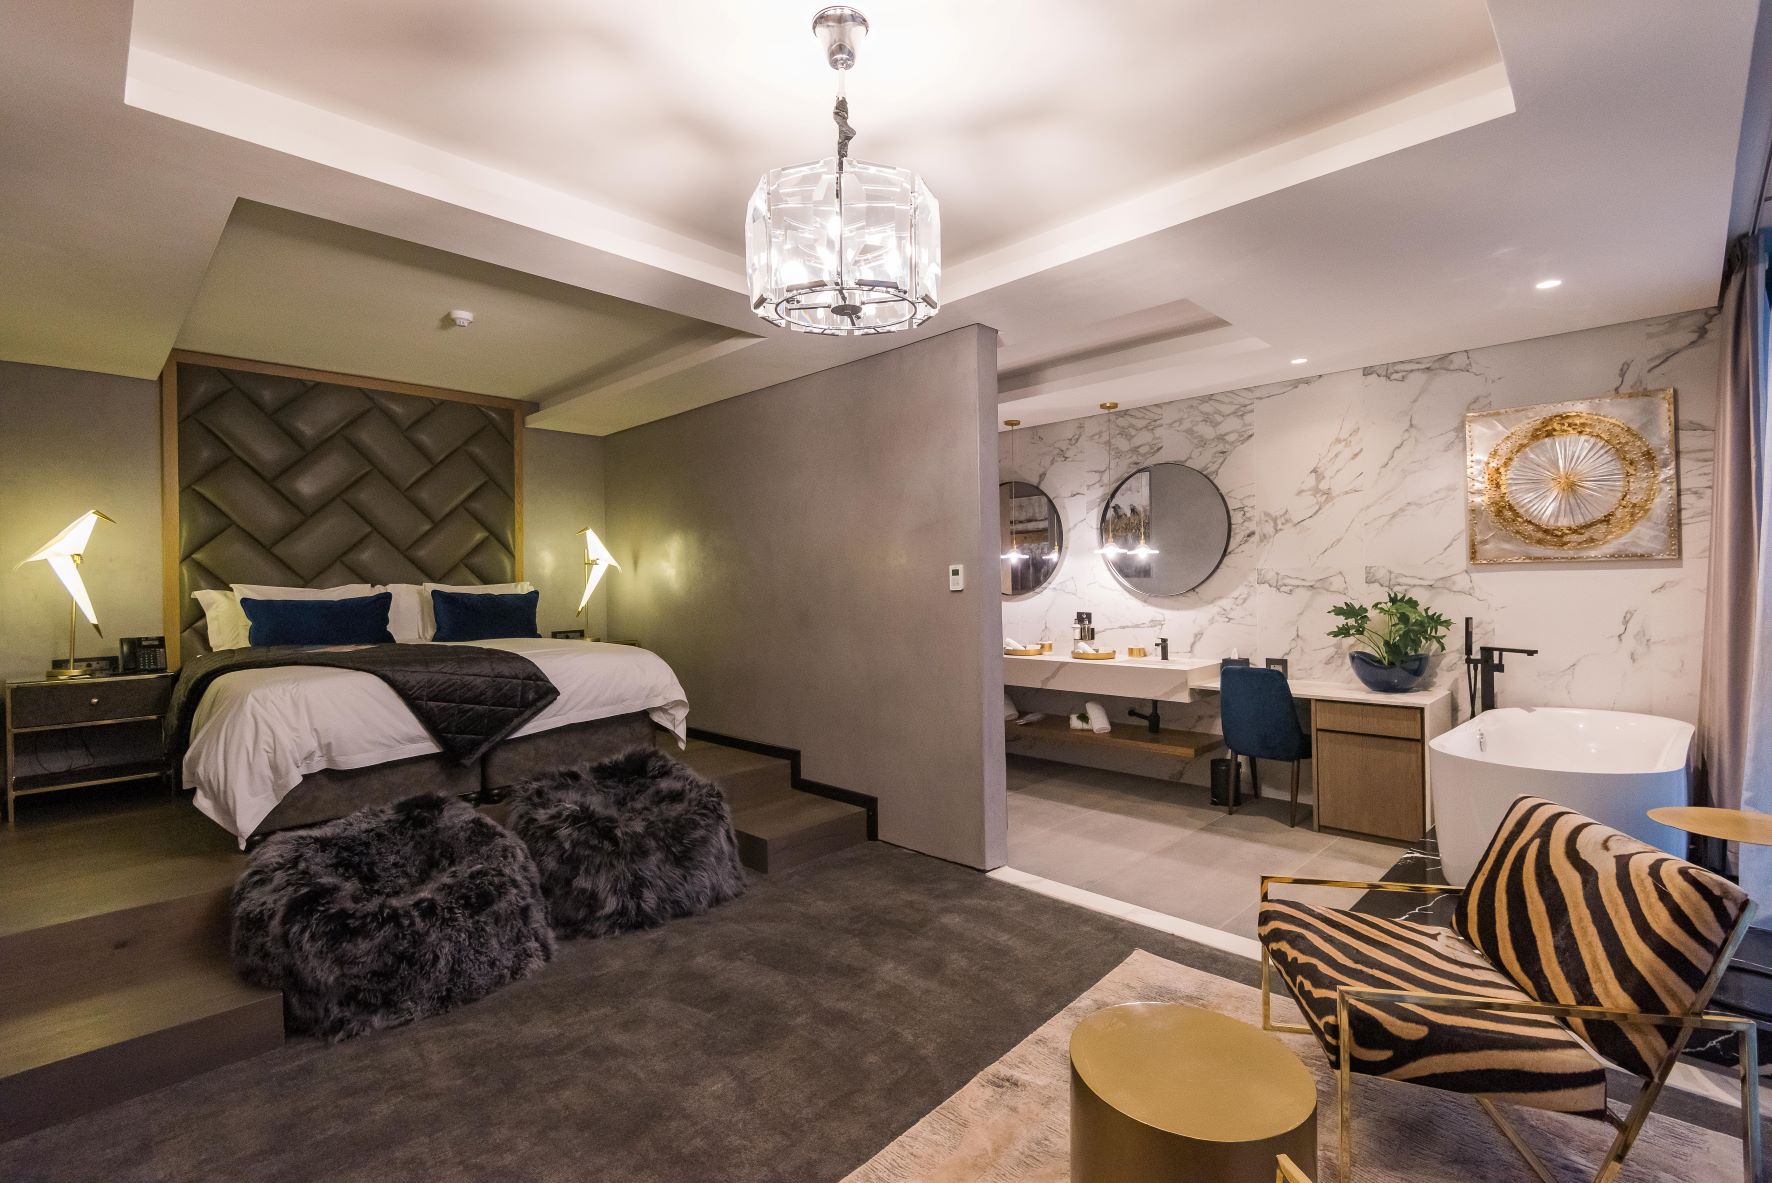 Vivari Hotel and Spa by Mantis in Johannesburg focuses on well-being and medical aesthetics. 